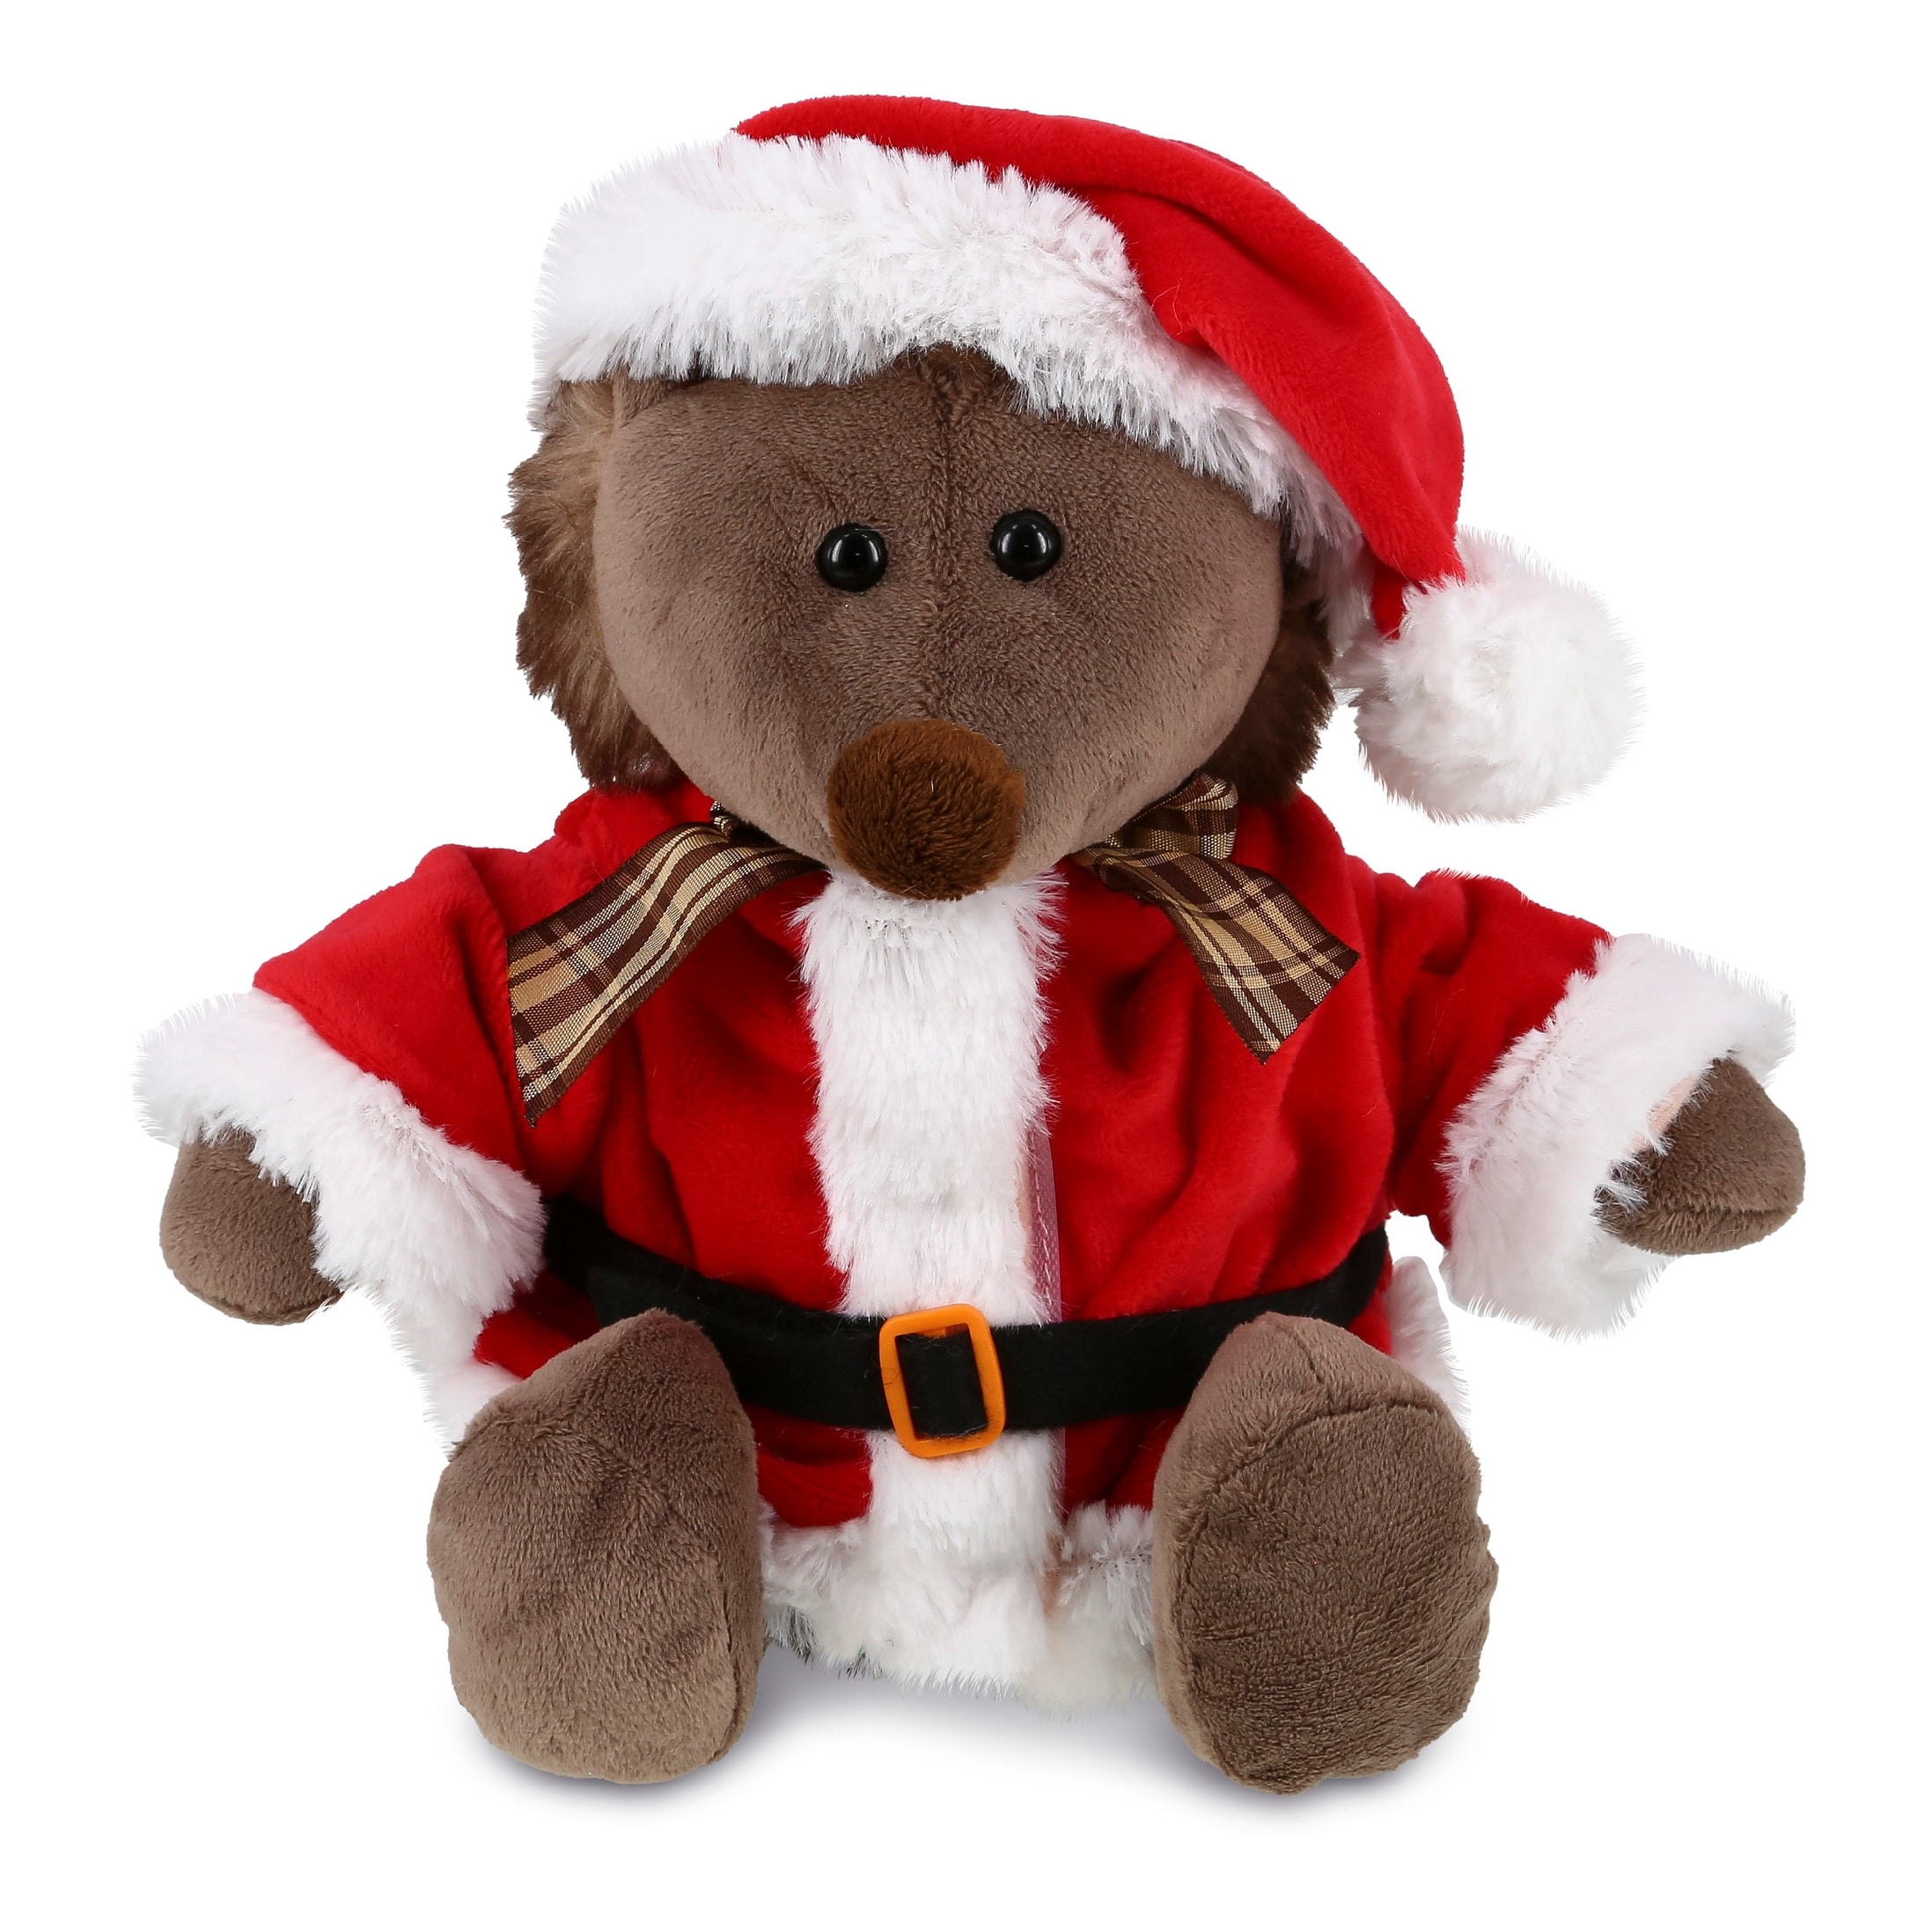 DolliBu Santa Hedgehog with Ribbon Stuffed Animal with Santa Outfit - 9 inches